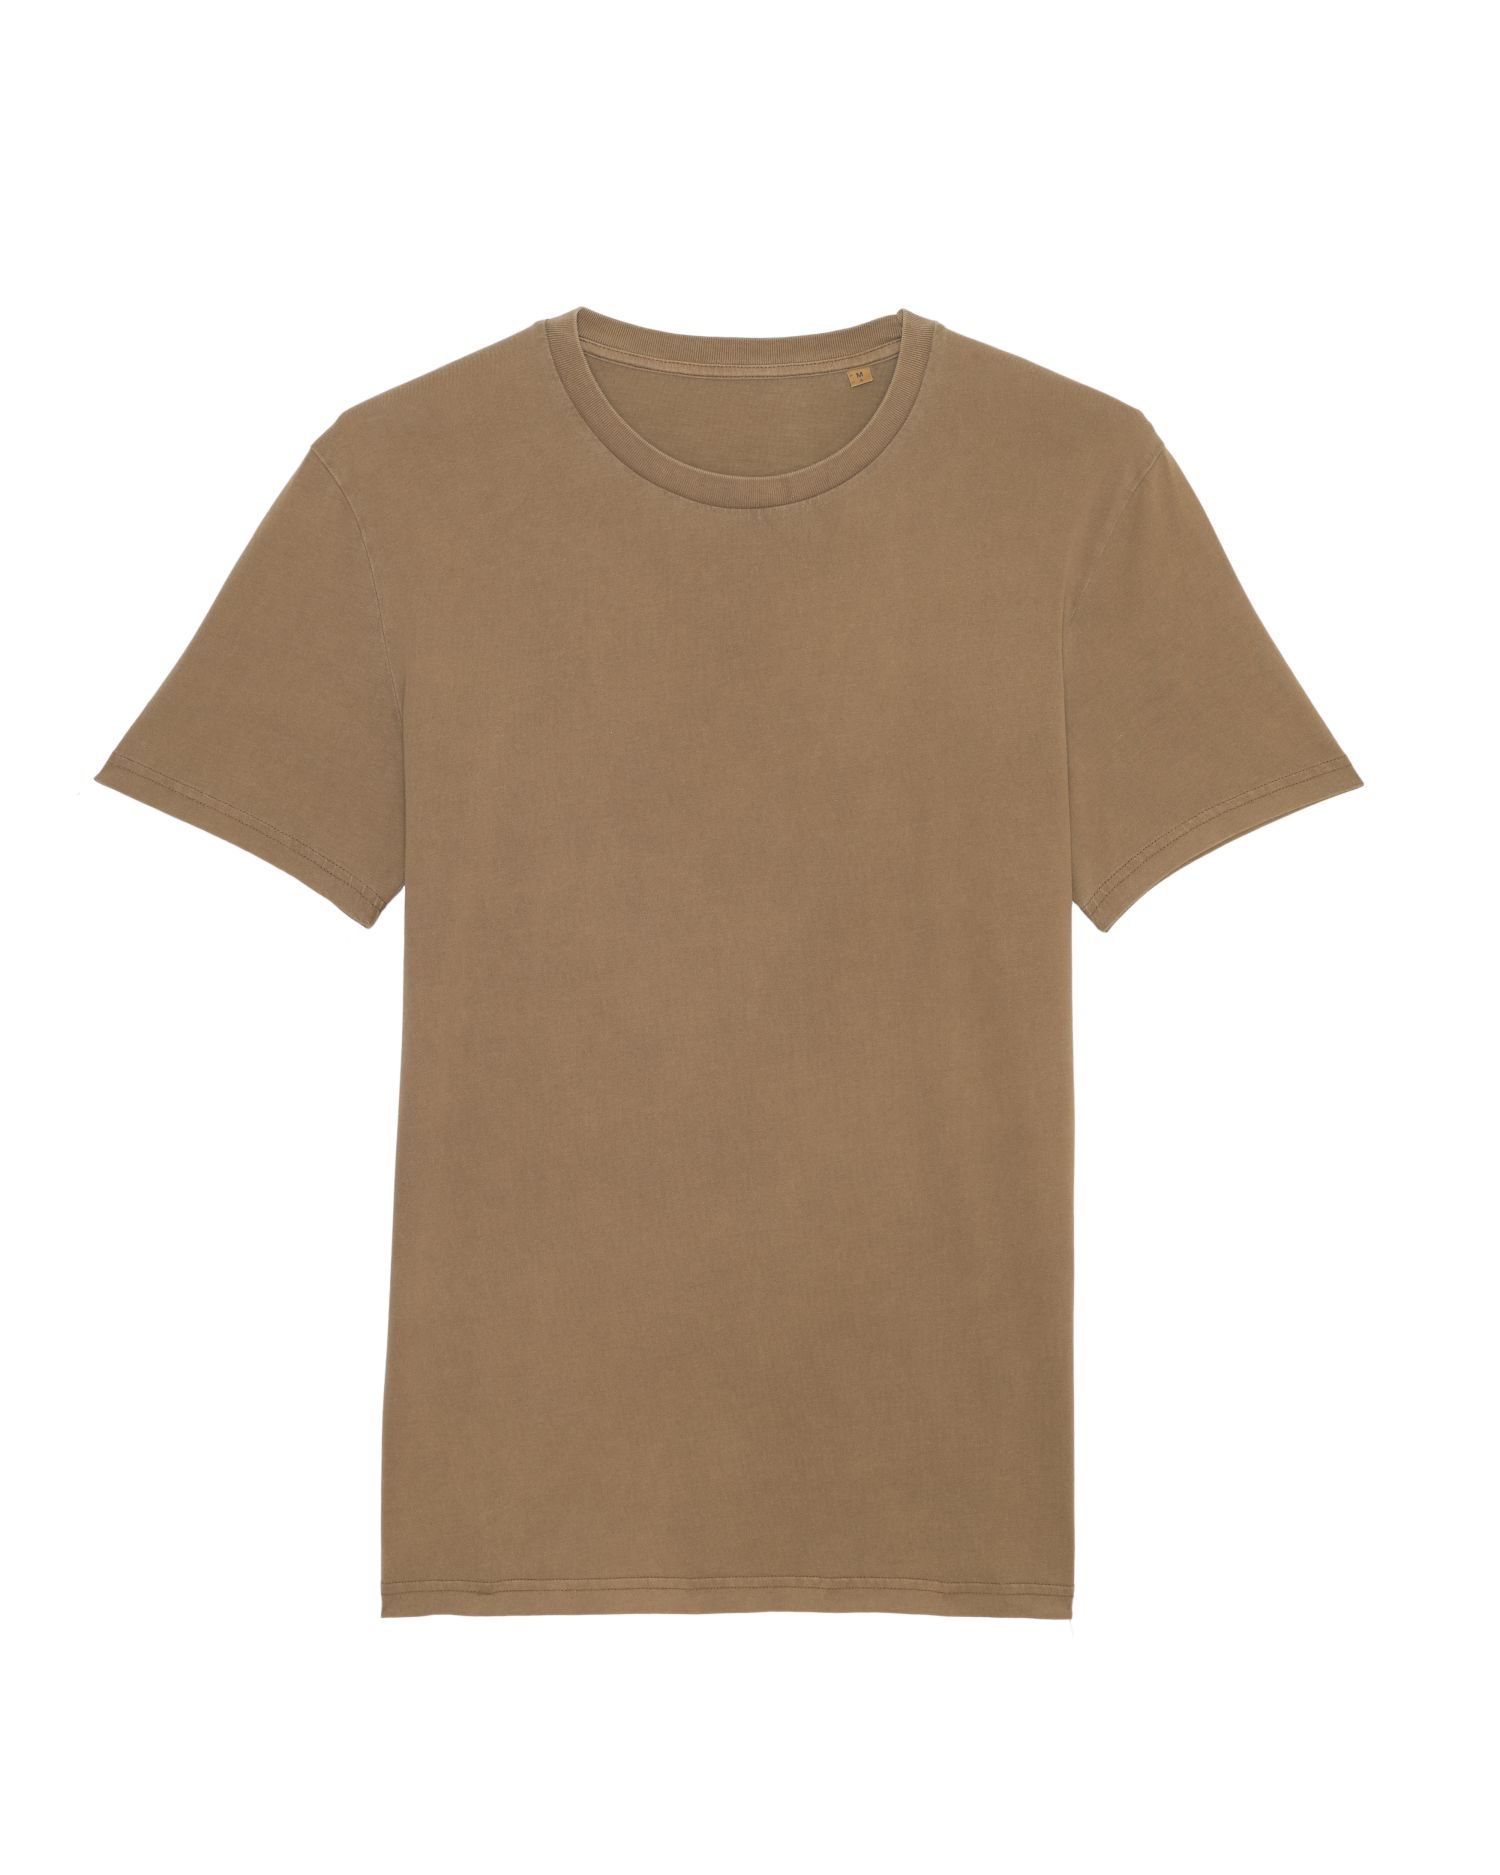 T-Shirt Creator Vintage in Farbe G. Dyed Caramel